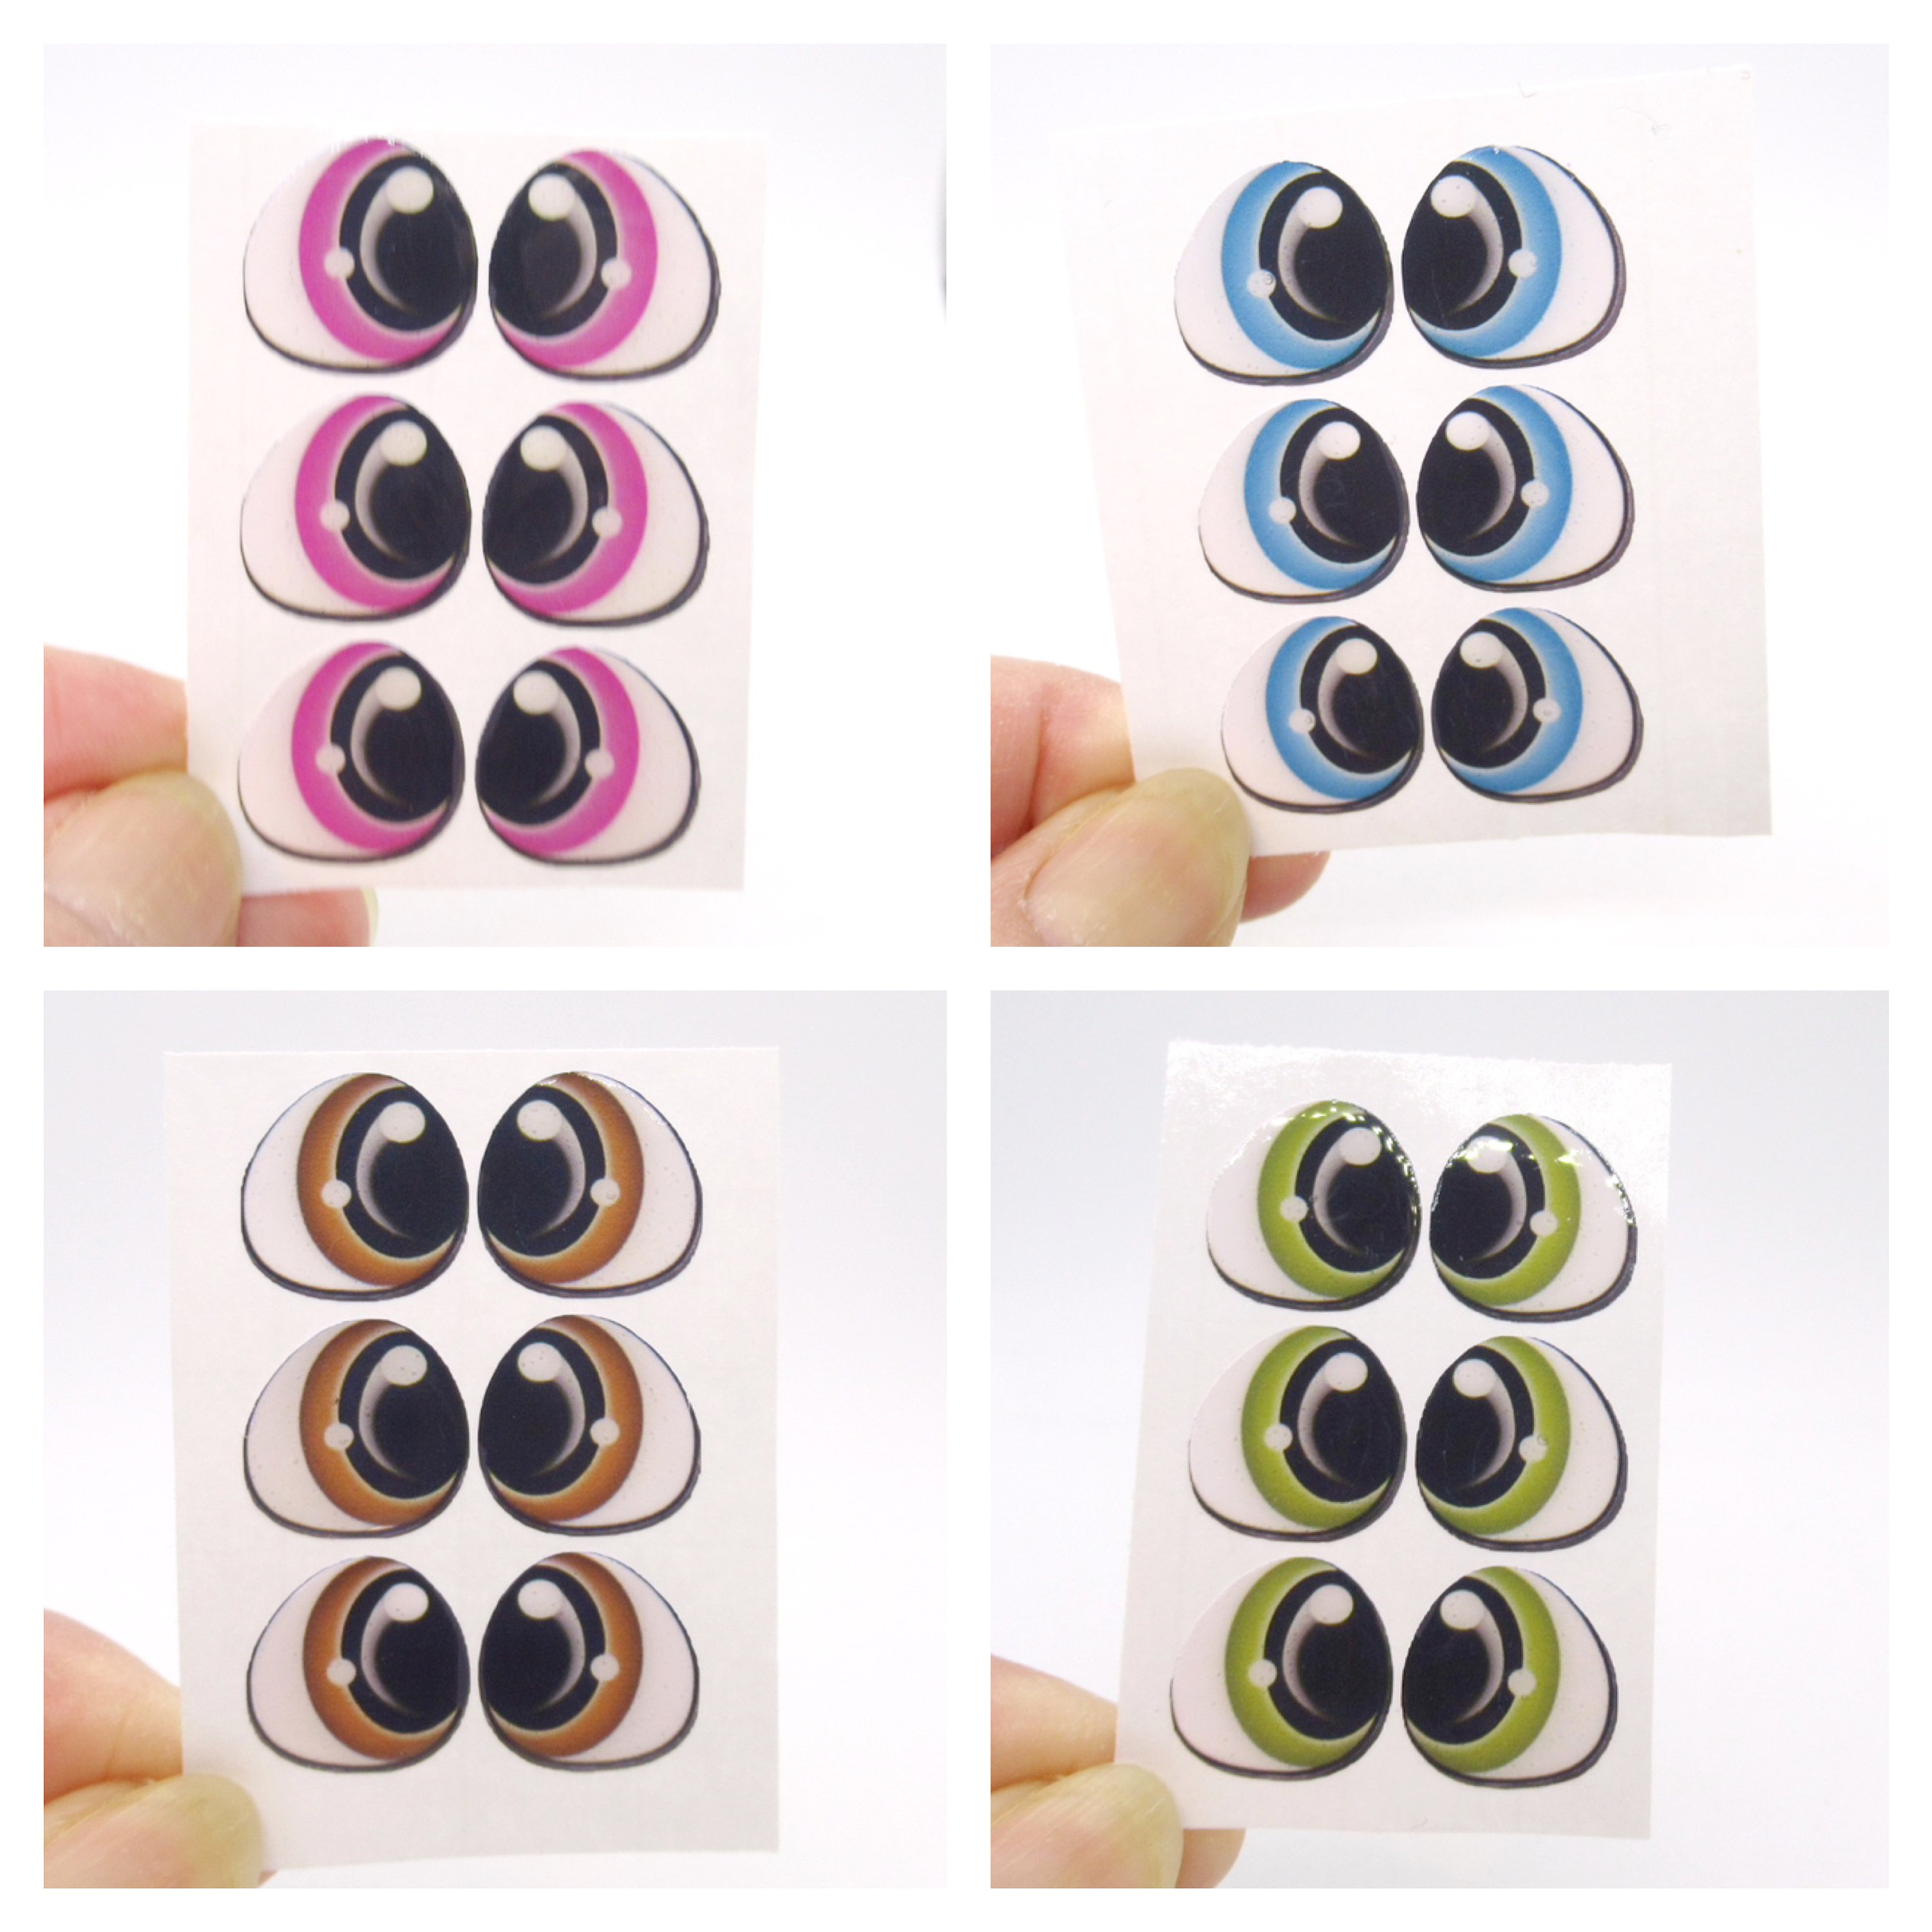 Resin 3D Eyes Black Color for Craft Figures, Stickers Adhesive Eye Supplies  for Dolls Diy, Set of 12 Adhesives Eyes Stickers for Crafts, 